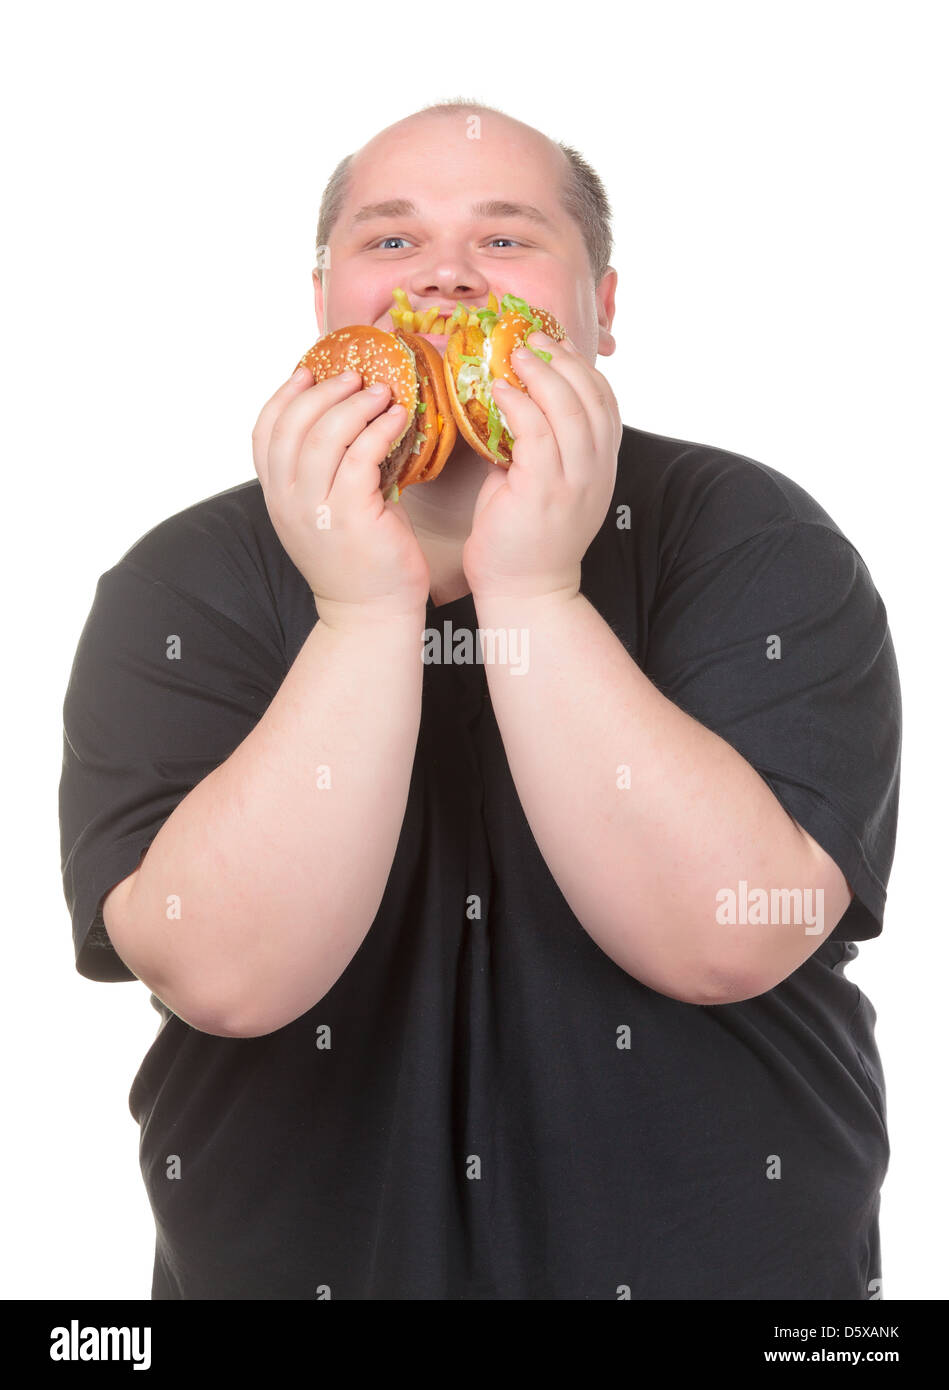 Fat Man Looks Lustfully at a Burger Stock Photo - Alamy